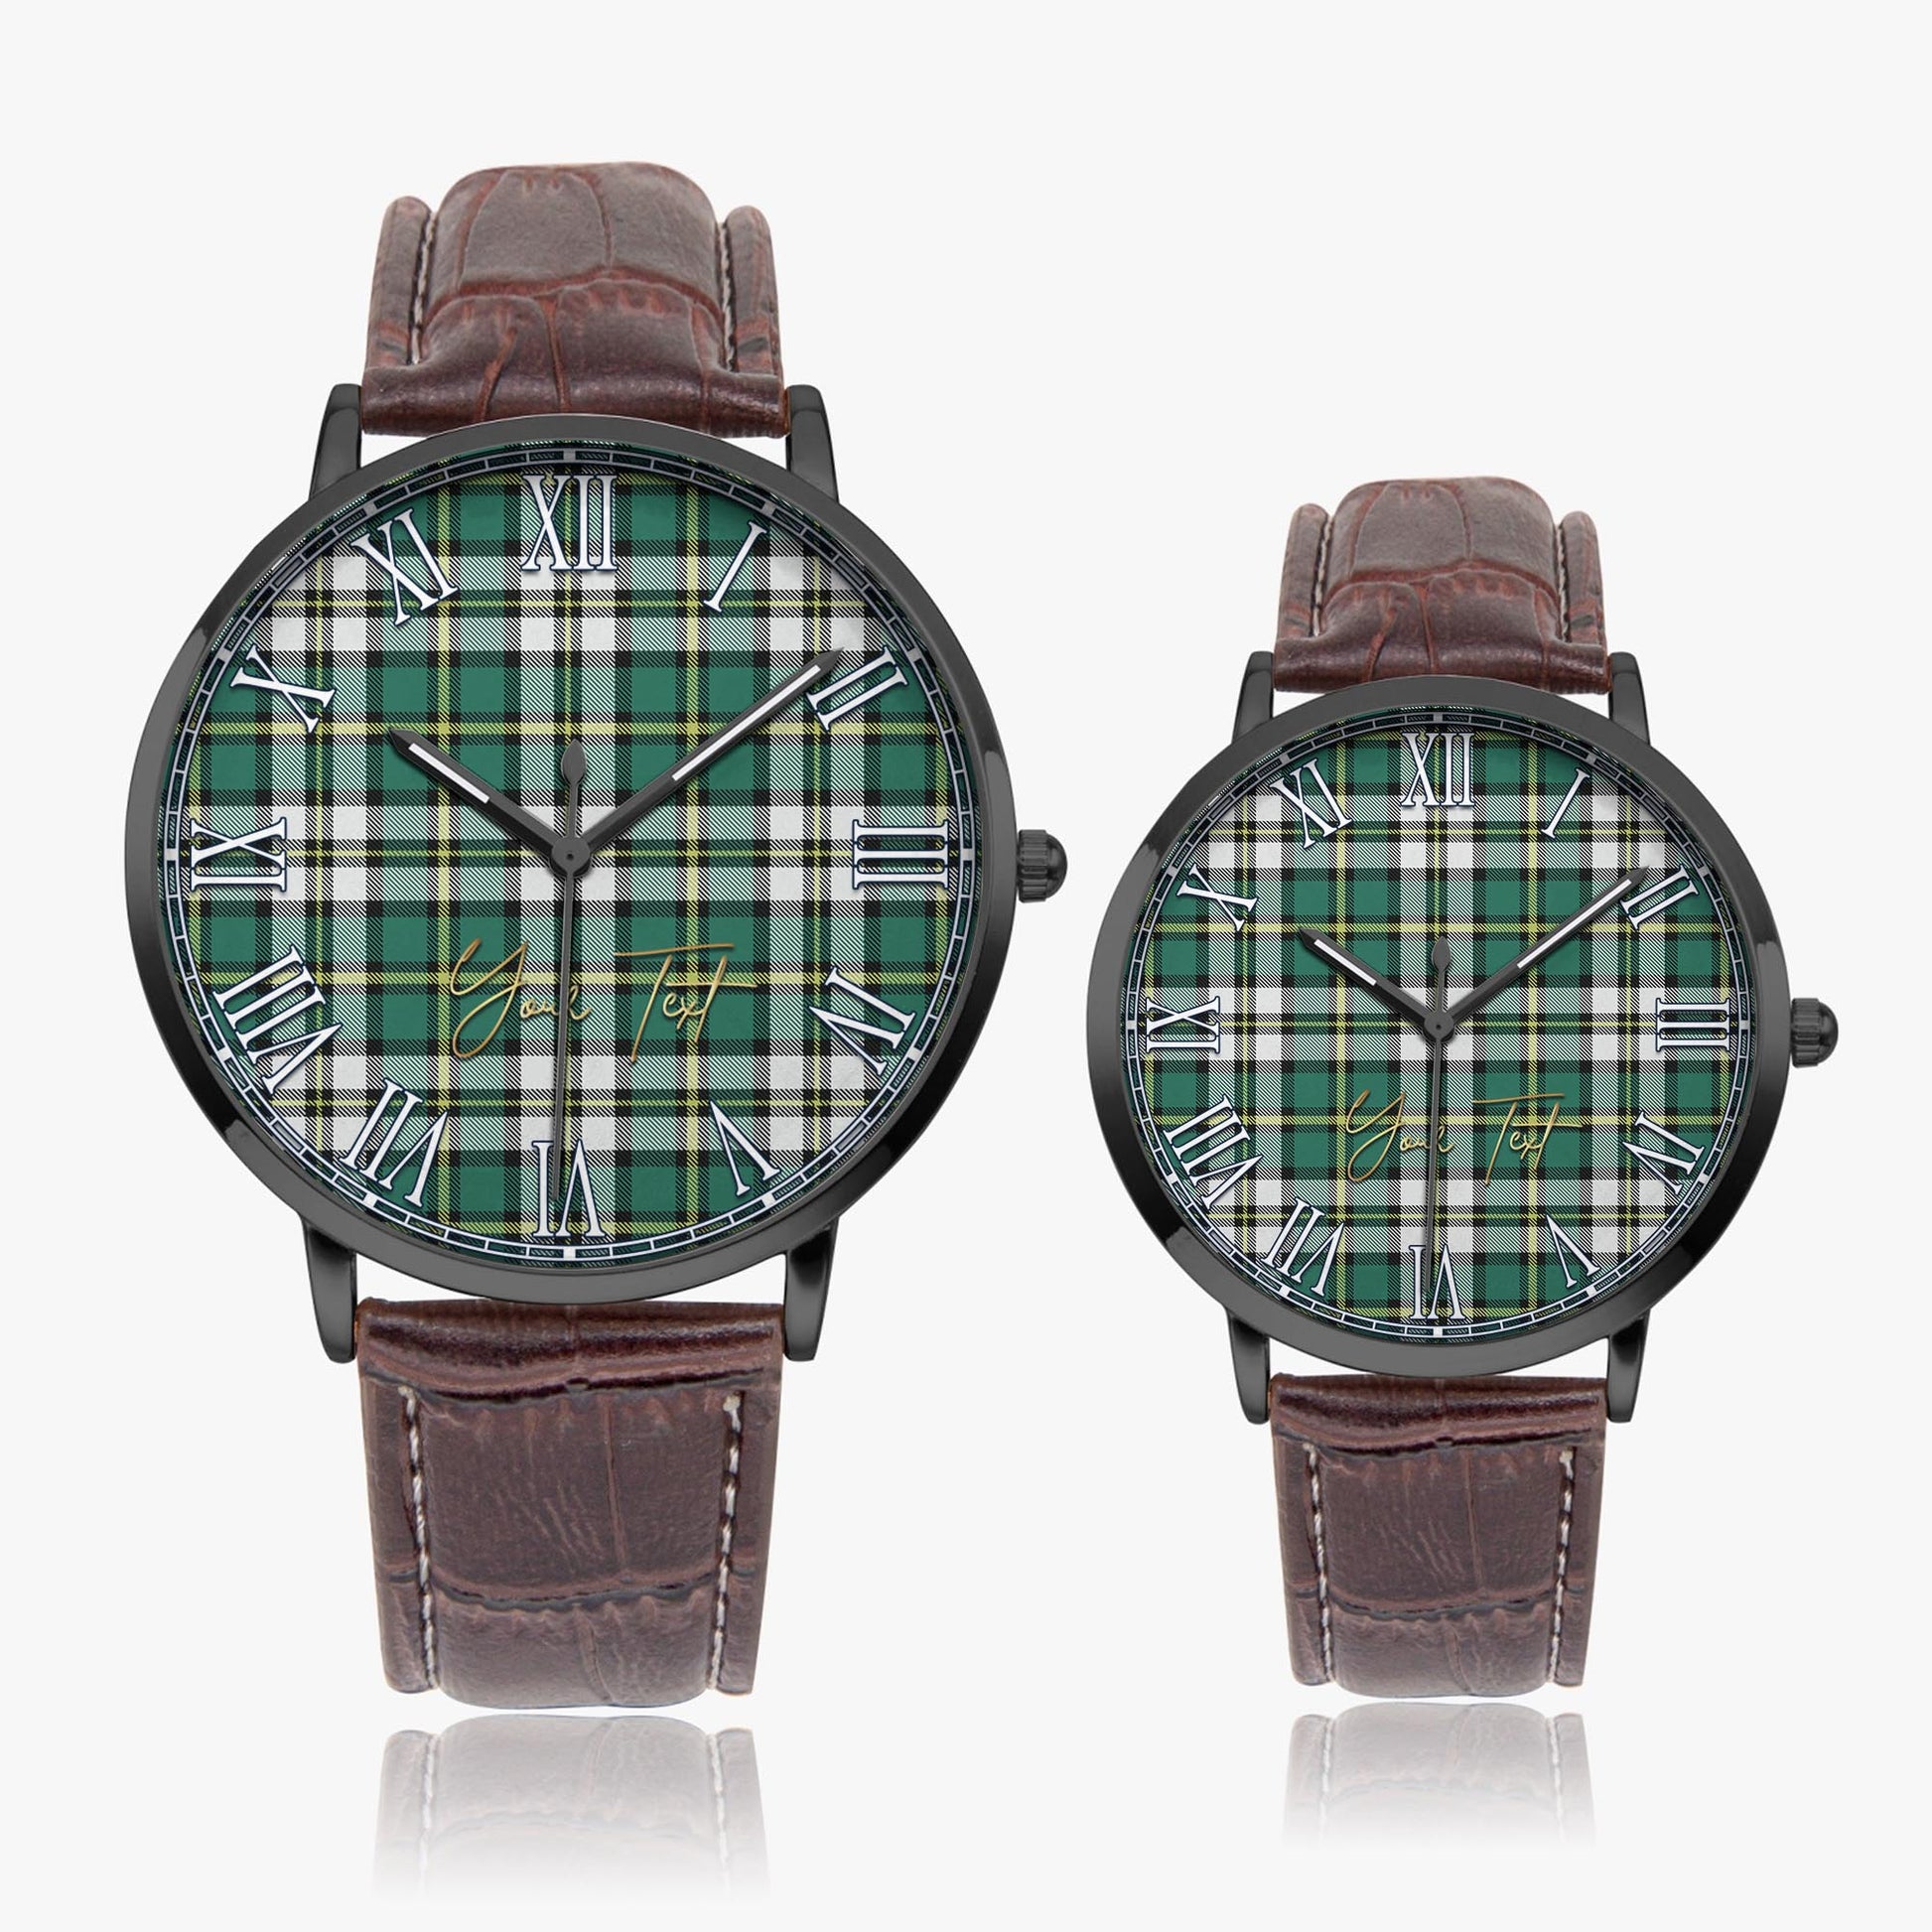 Cape Breton Island Canada Tartan Personalized Your Text Leather Trap Quartz Watch Ultra Thin Black Case With Brown Leather Strap - Tartanvibesclothing